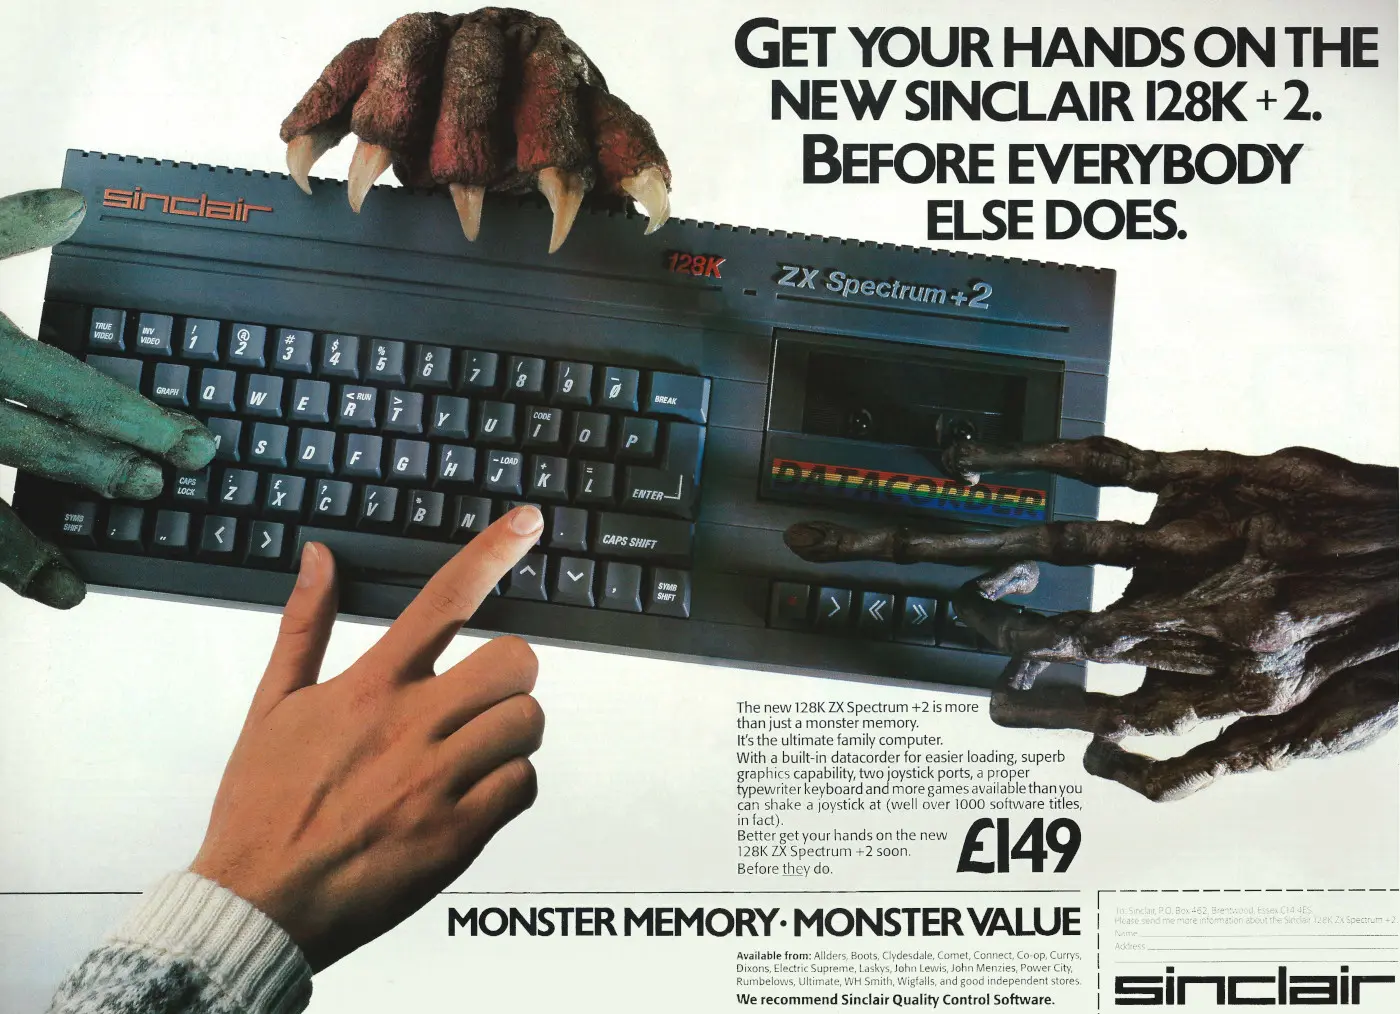 Sinclair Advert: Get your hands on the new Sinclair 128K +2. Before everybody else does, from Your Computer, June 1987